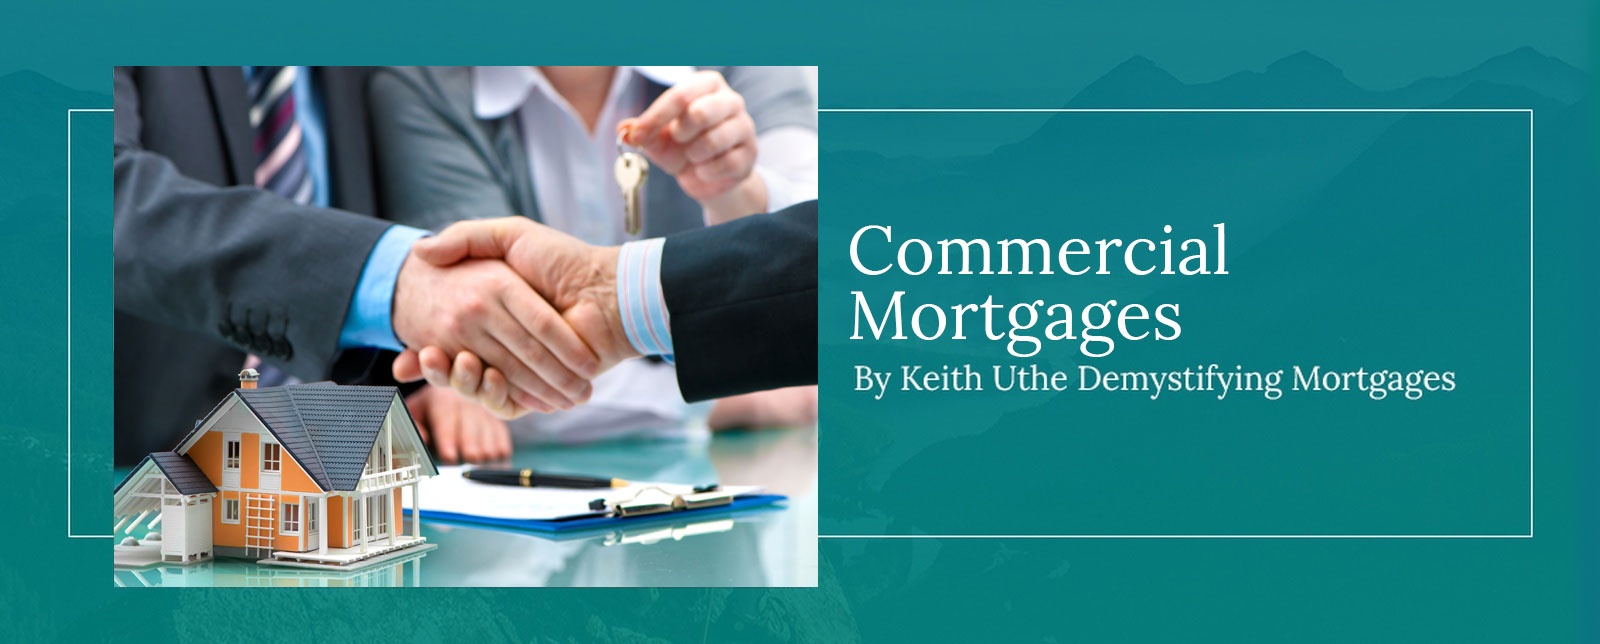 Keith Uthe Demystifying Mortgages - Commercial Mortgages in Calgary, Edmonton, Alberta